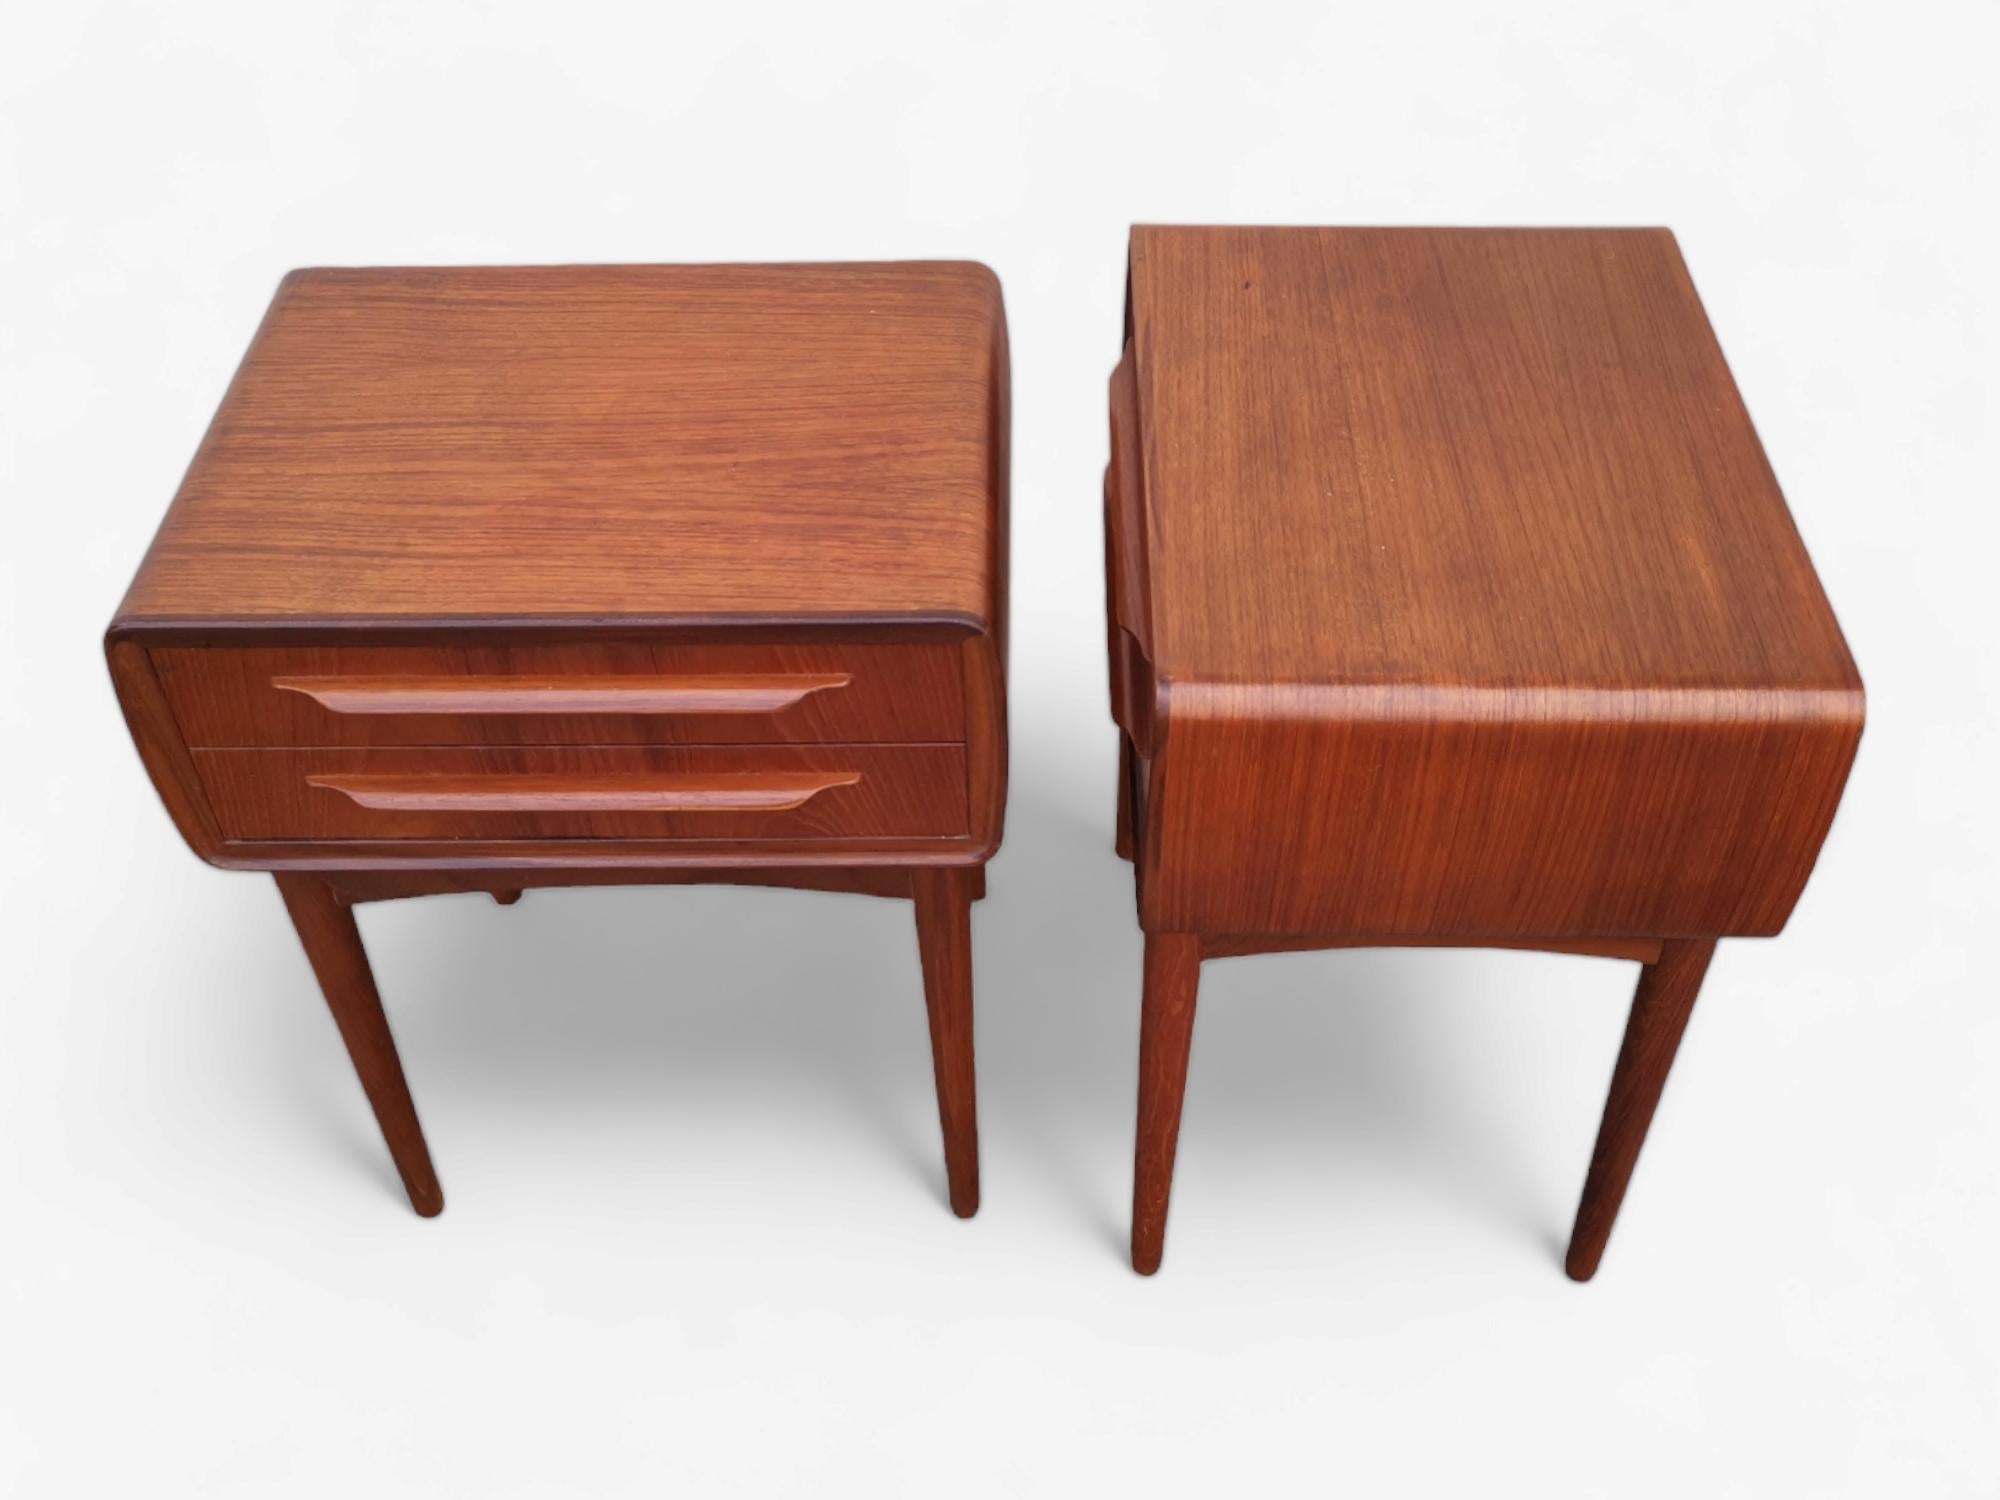 A Danish pair of Teak Nightstands Designed by Johannes Andersen by Silkeborg Møbelfabrik in the 1960s.
Classic Danish Nightstands From the 60s, With two drawers in each nightstand,  so you can store away, and keep your space organized and